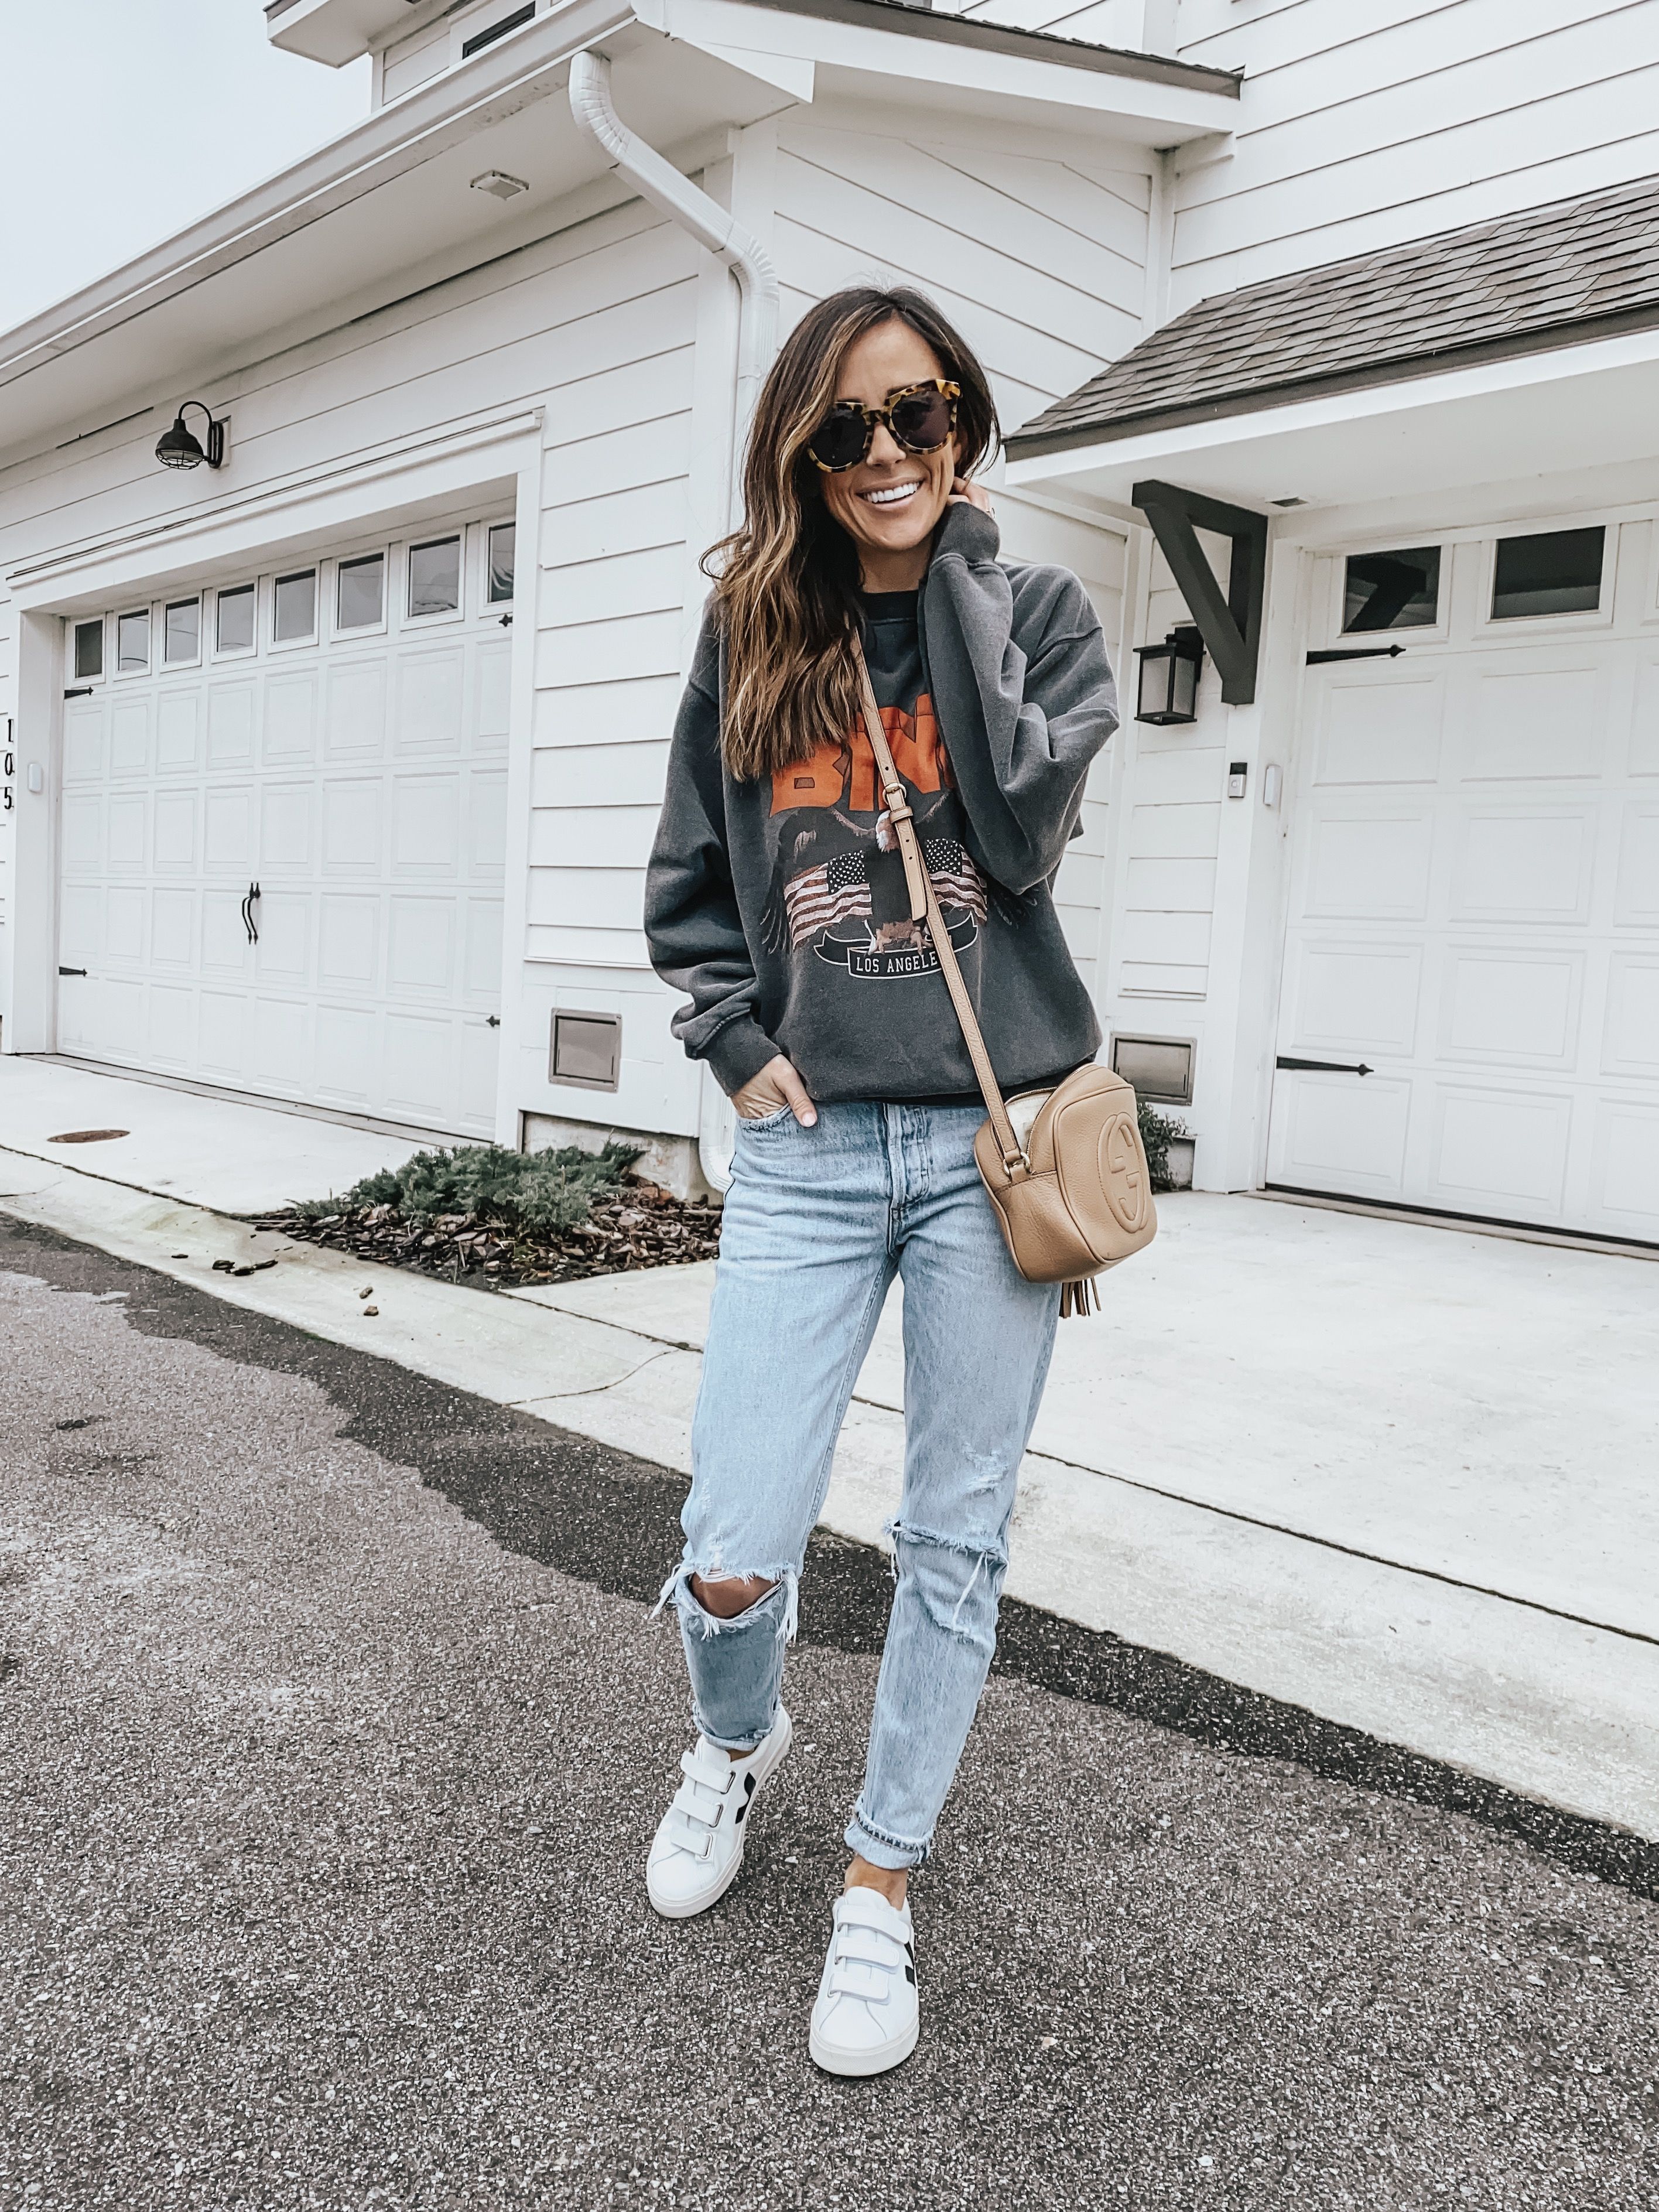 Shopbop Sale: Recent Outfits + My Personal Picks | Alyson Haley -   16 style 2019 college ideas